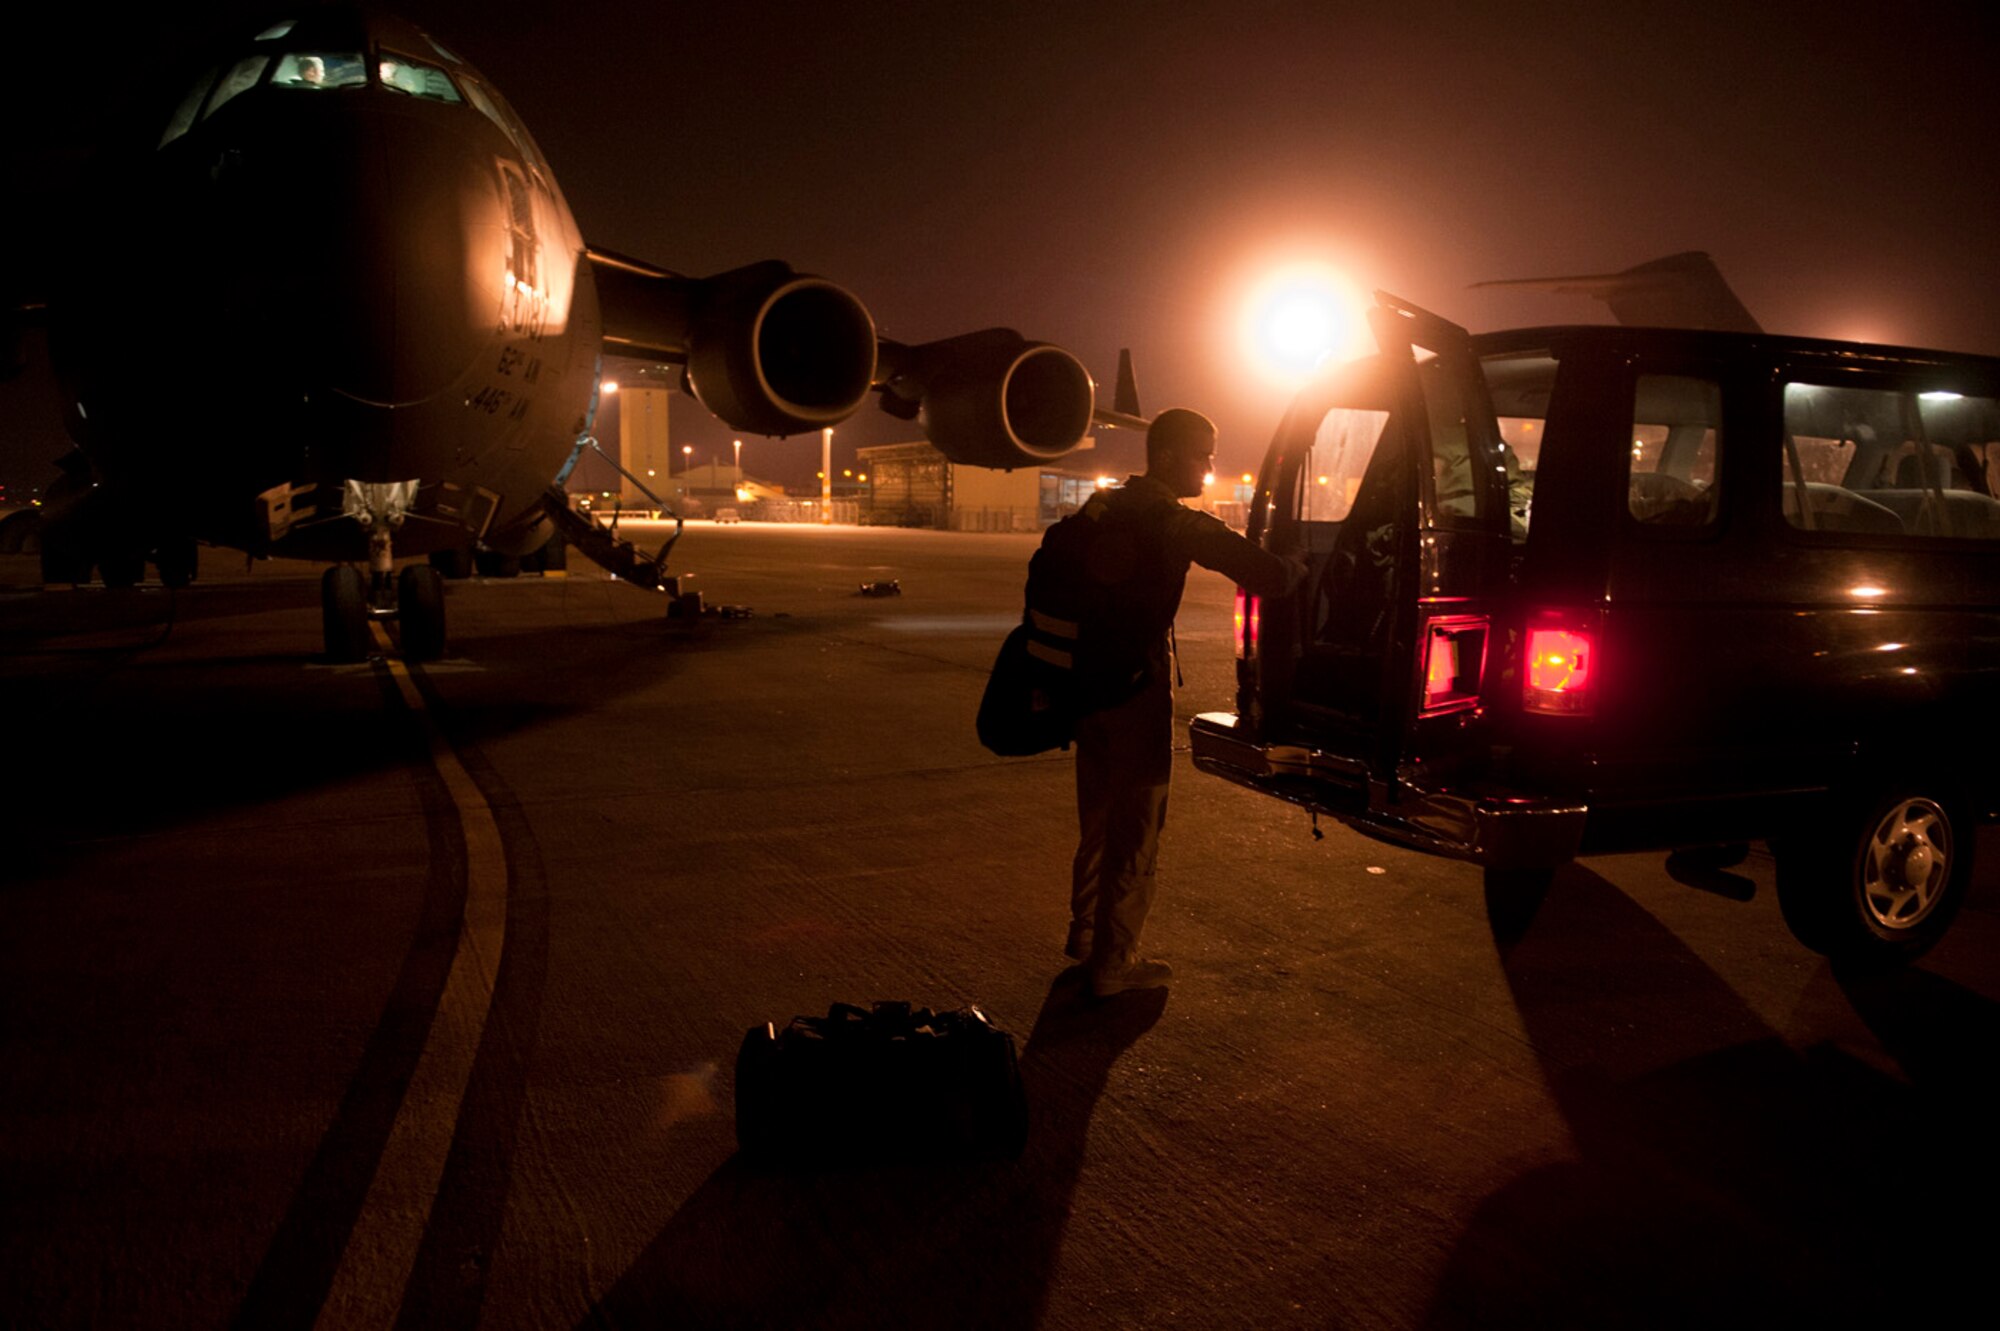 Capt. Eric Bowers, an 817th Expeditionary Airlift Squadron pilot, unloads flight equipment from a C-17 Globemaster III aircraft into a van after a flight Aug. 18, 2011, at Incirlik Air Base, Turkey. The crew transported equipment and supplies from Incirlik to Kandahar Air Field, Afghanistan. (U.S. Air Force photo by Tech. Sgt. Michael B. Keller/Released)